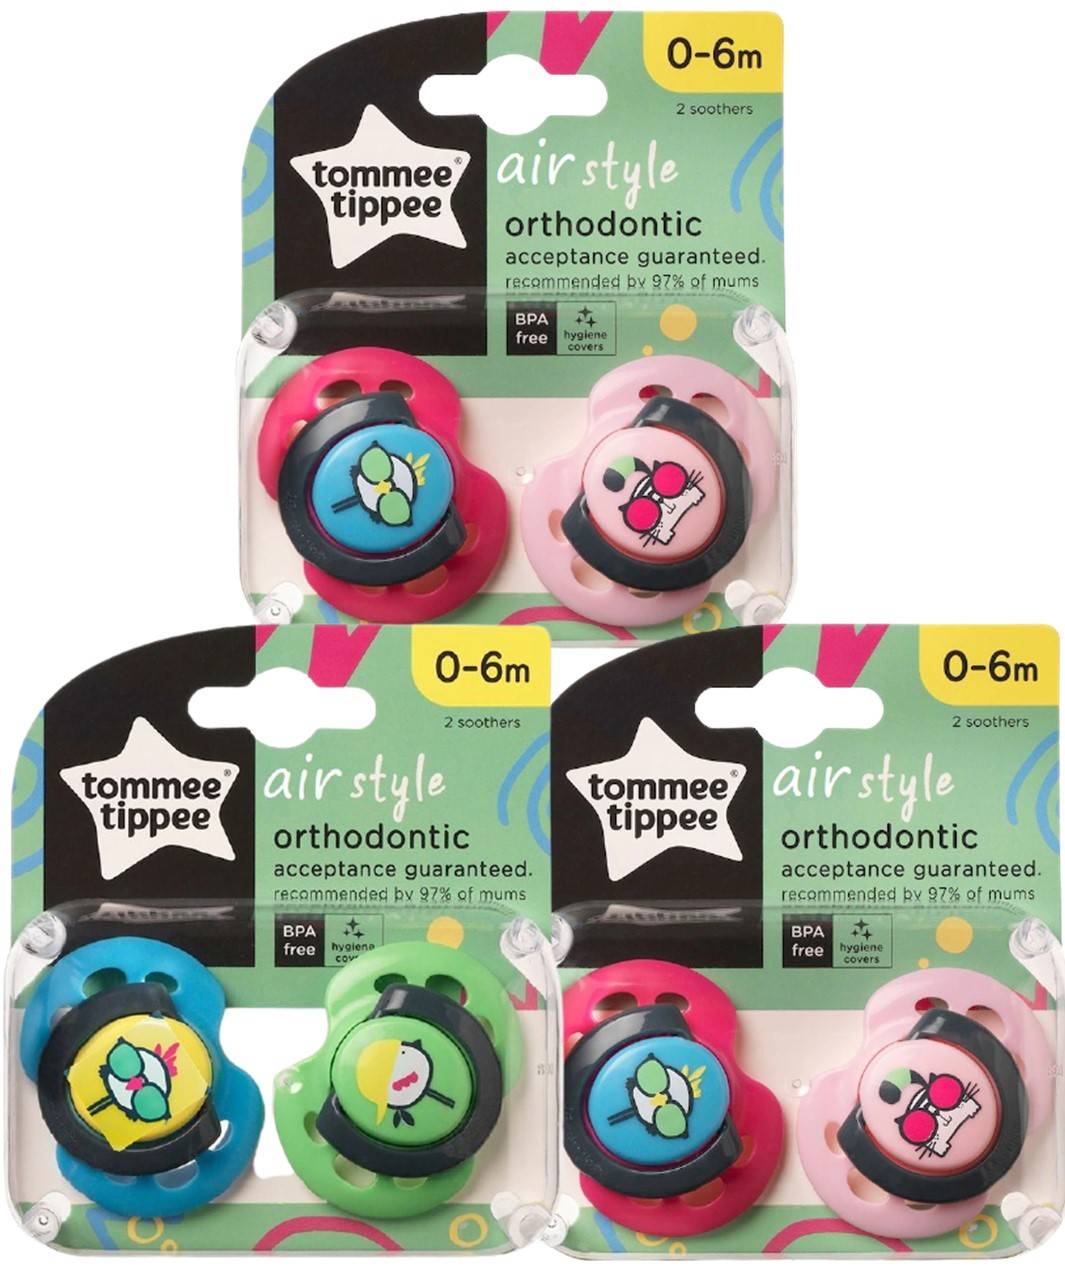 Tommee Tippee Air Style Orthodontic Soother 0-6m 2pcs